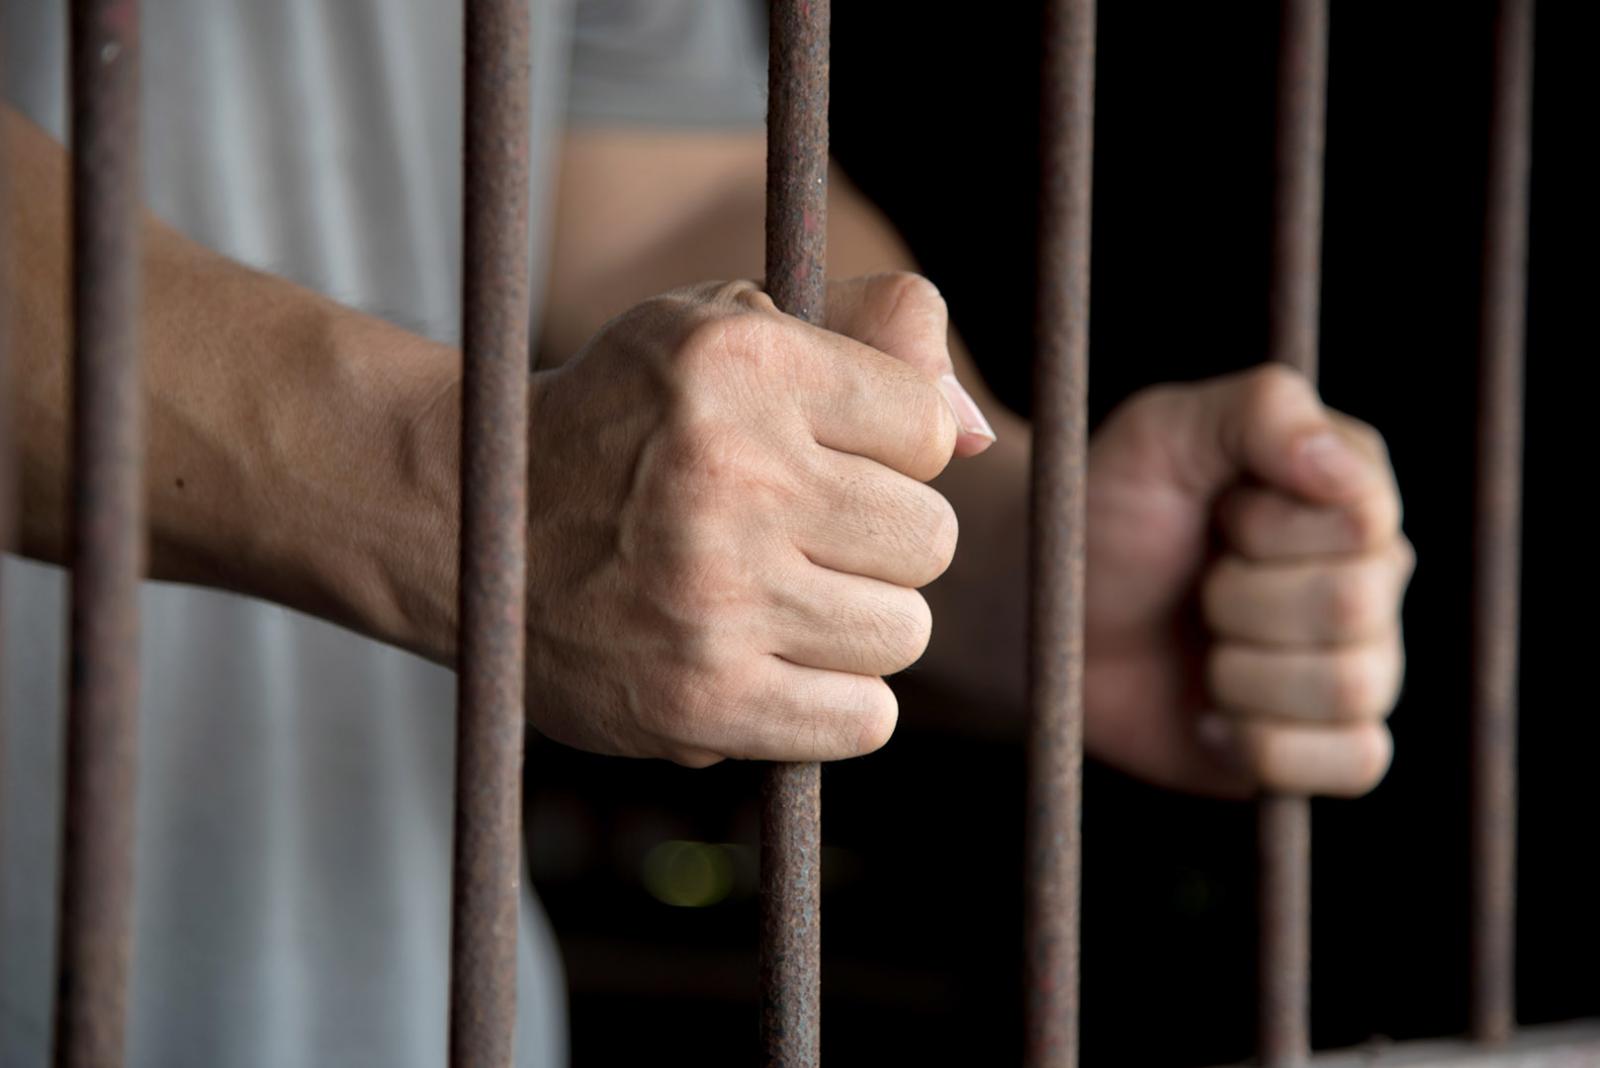 We Know Your Age and Gender Just Based on These 15 “Would You Rather” Questions prison